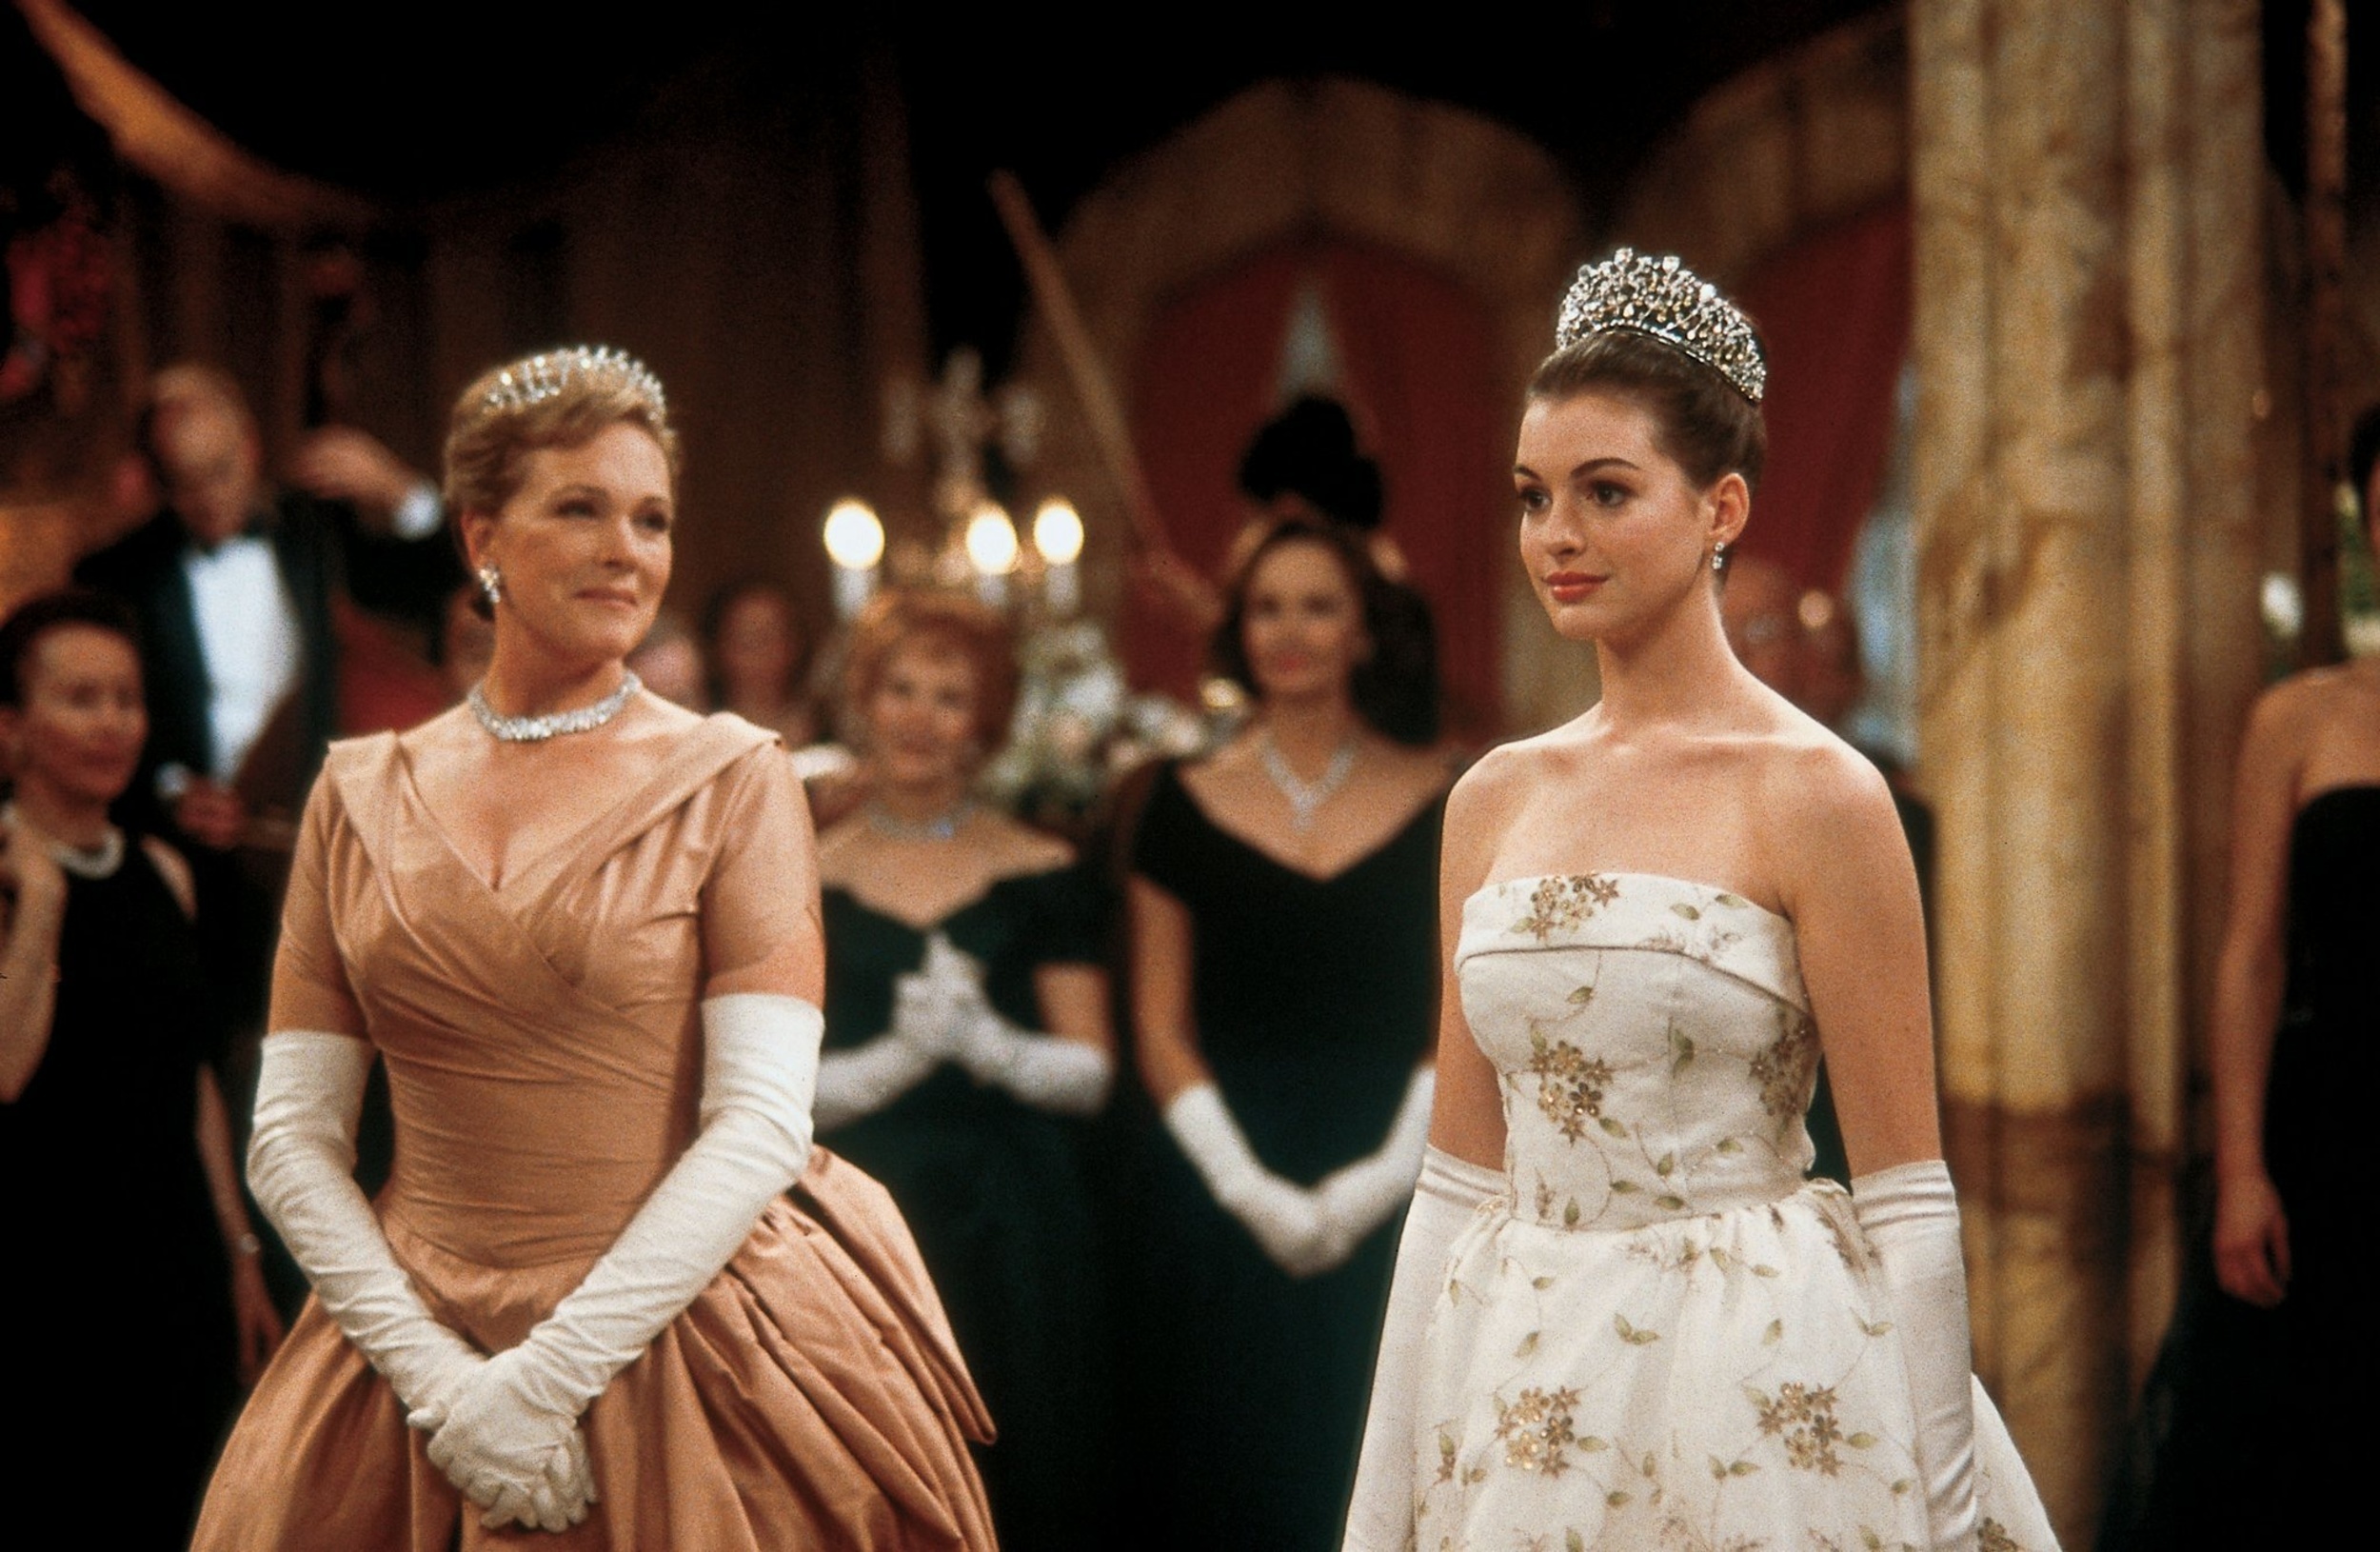 <p><em>The Princess Diaries</em> is such an iconic film of the early 2000s that there are loads of people who don’t even know it was a book first. Anne Hathaway and Julie Andrews truly made this story about a girl who didn’t know she was a princess come to life. </p><p>You may also like: <a href='https://www.yardbarker.com/entertainment/articles/20_facts_you_might_not_know_about_fast_times_at_ridgemont_high_110623/s1__38555791'>20 facts you might not know about 'Fast Times at Ridgemont High'</a></p>